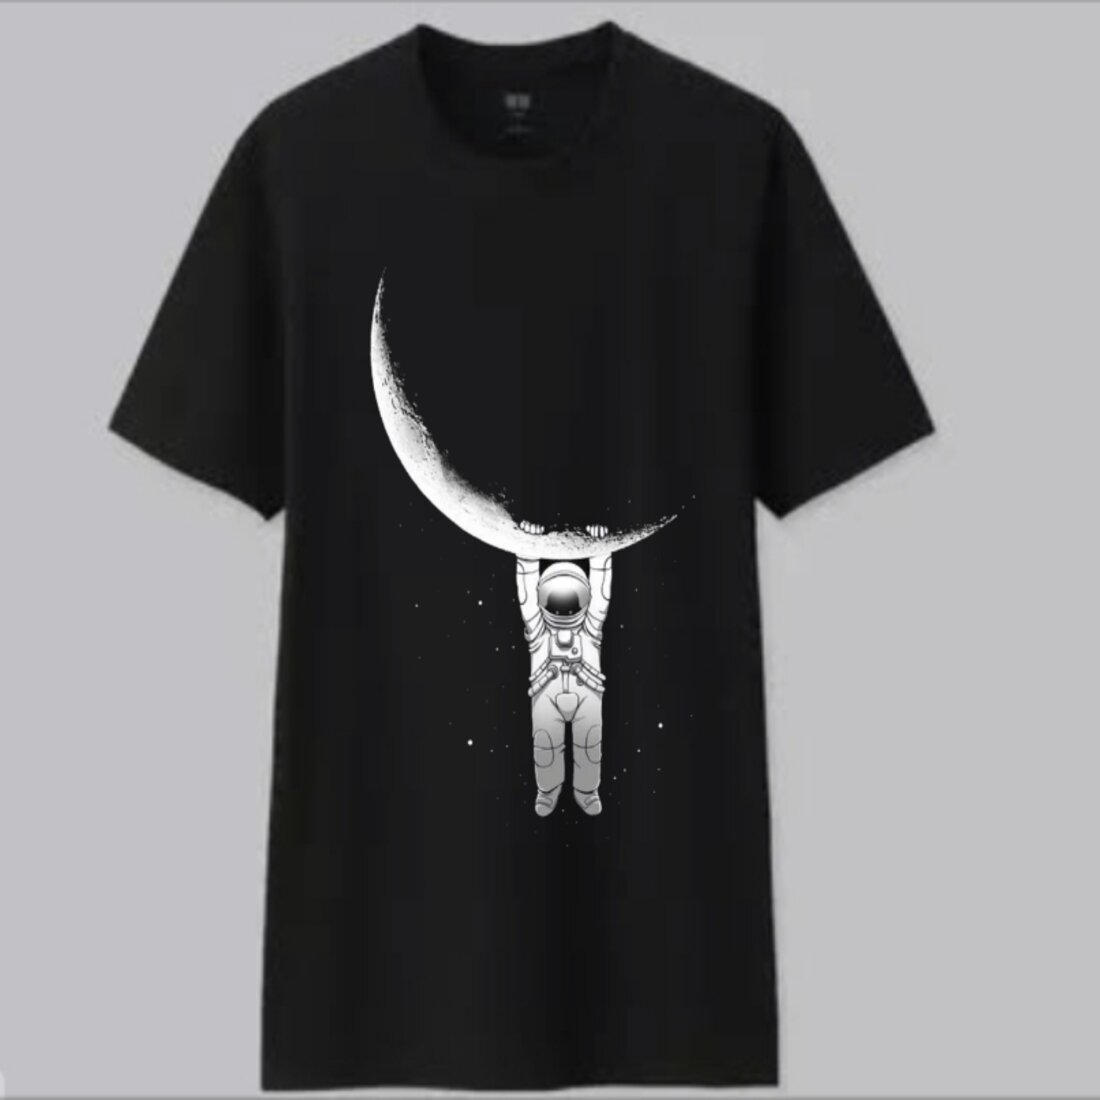 Astronaut hanging t-shirt design preview image.